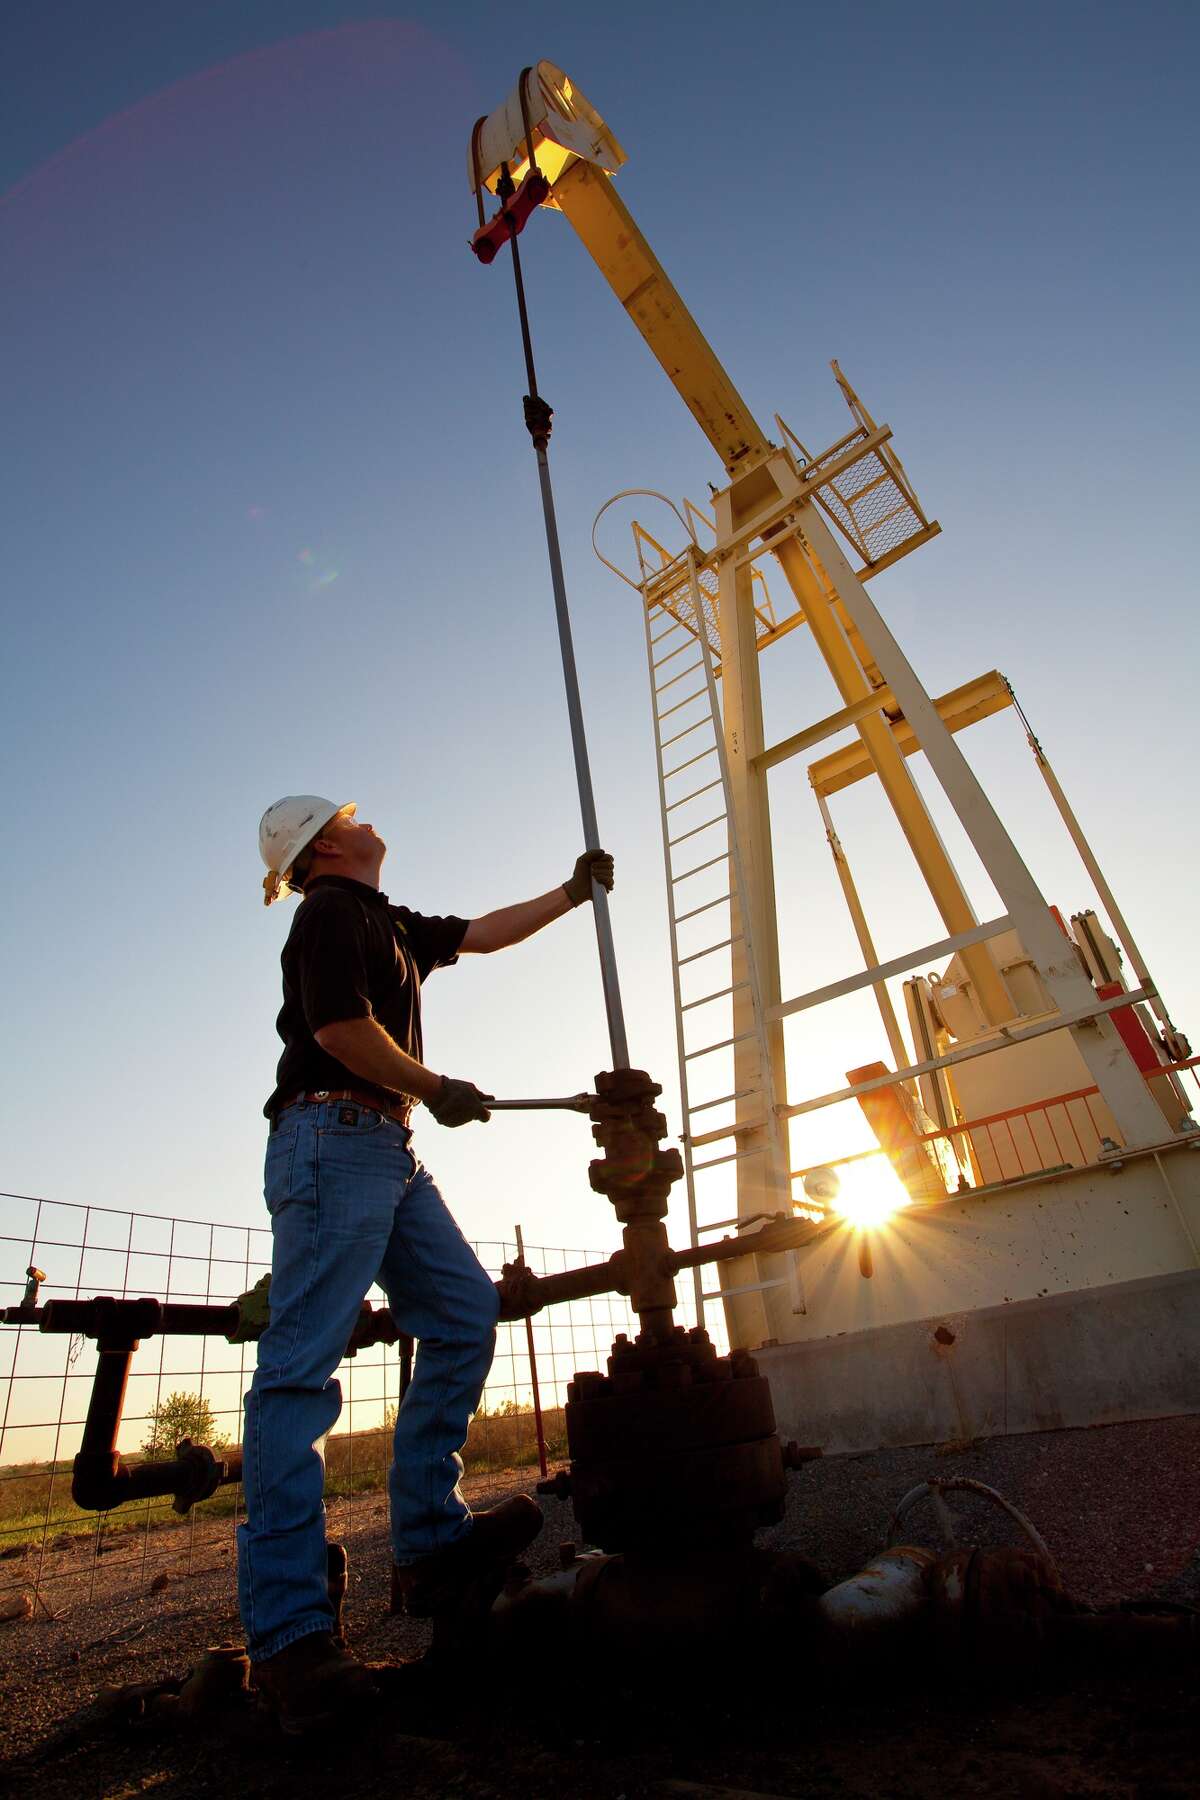 Linn Energy is producing in the Permian Basin. Berry Petroleum has assets there as well.